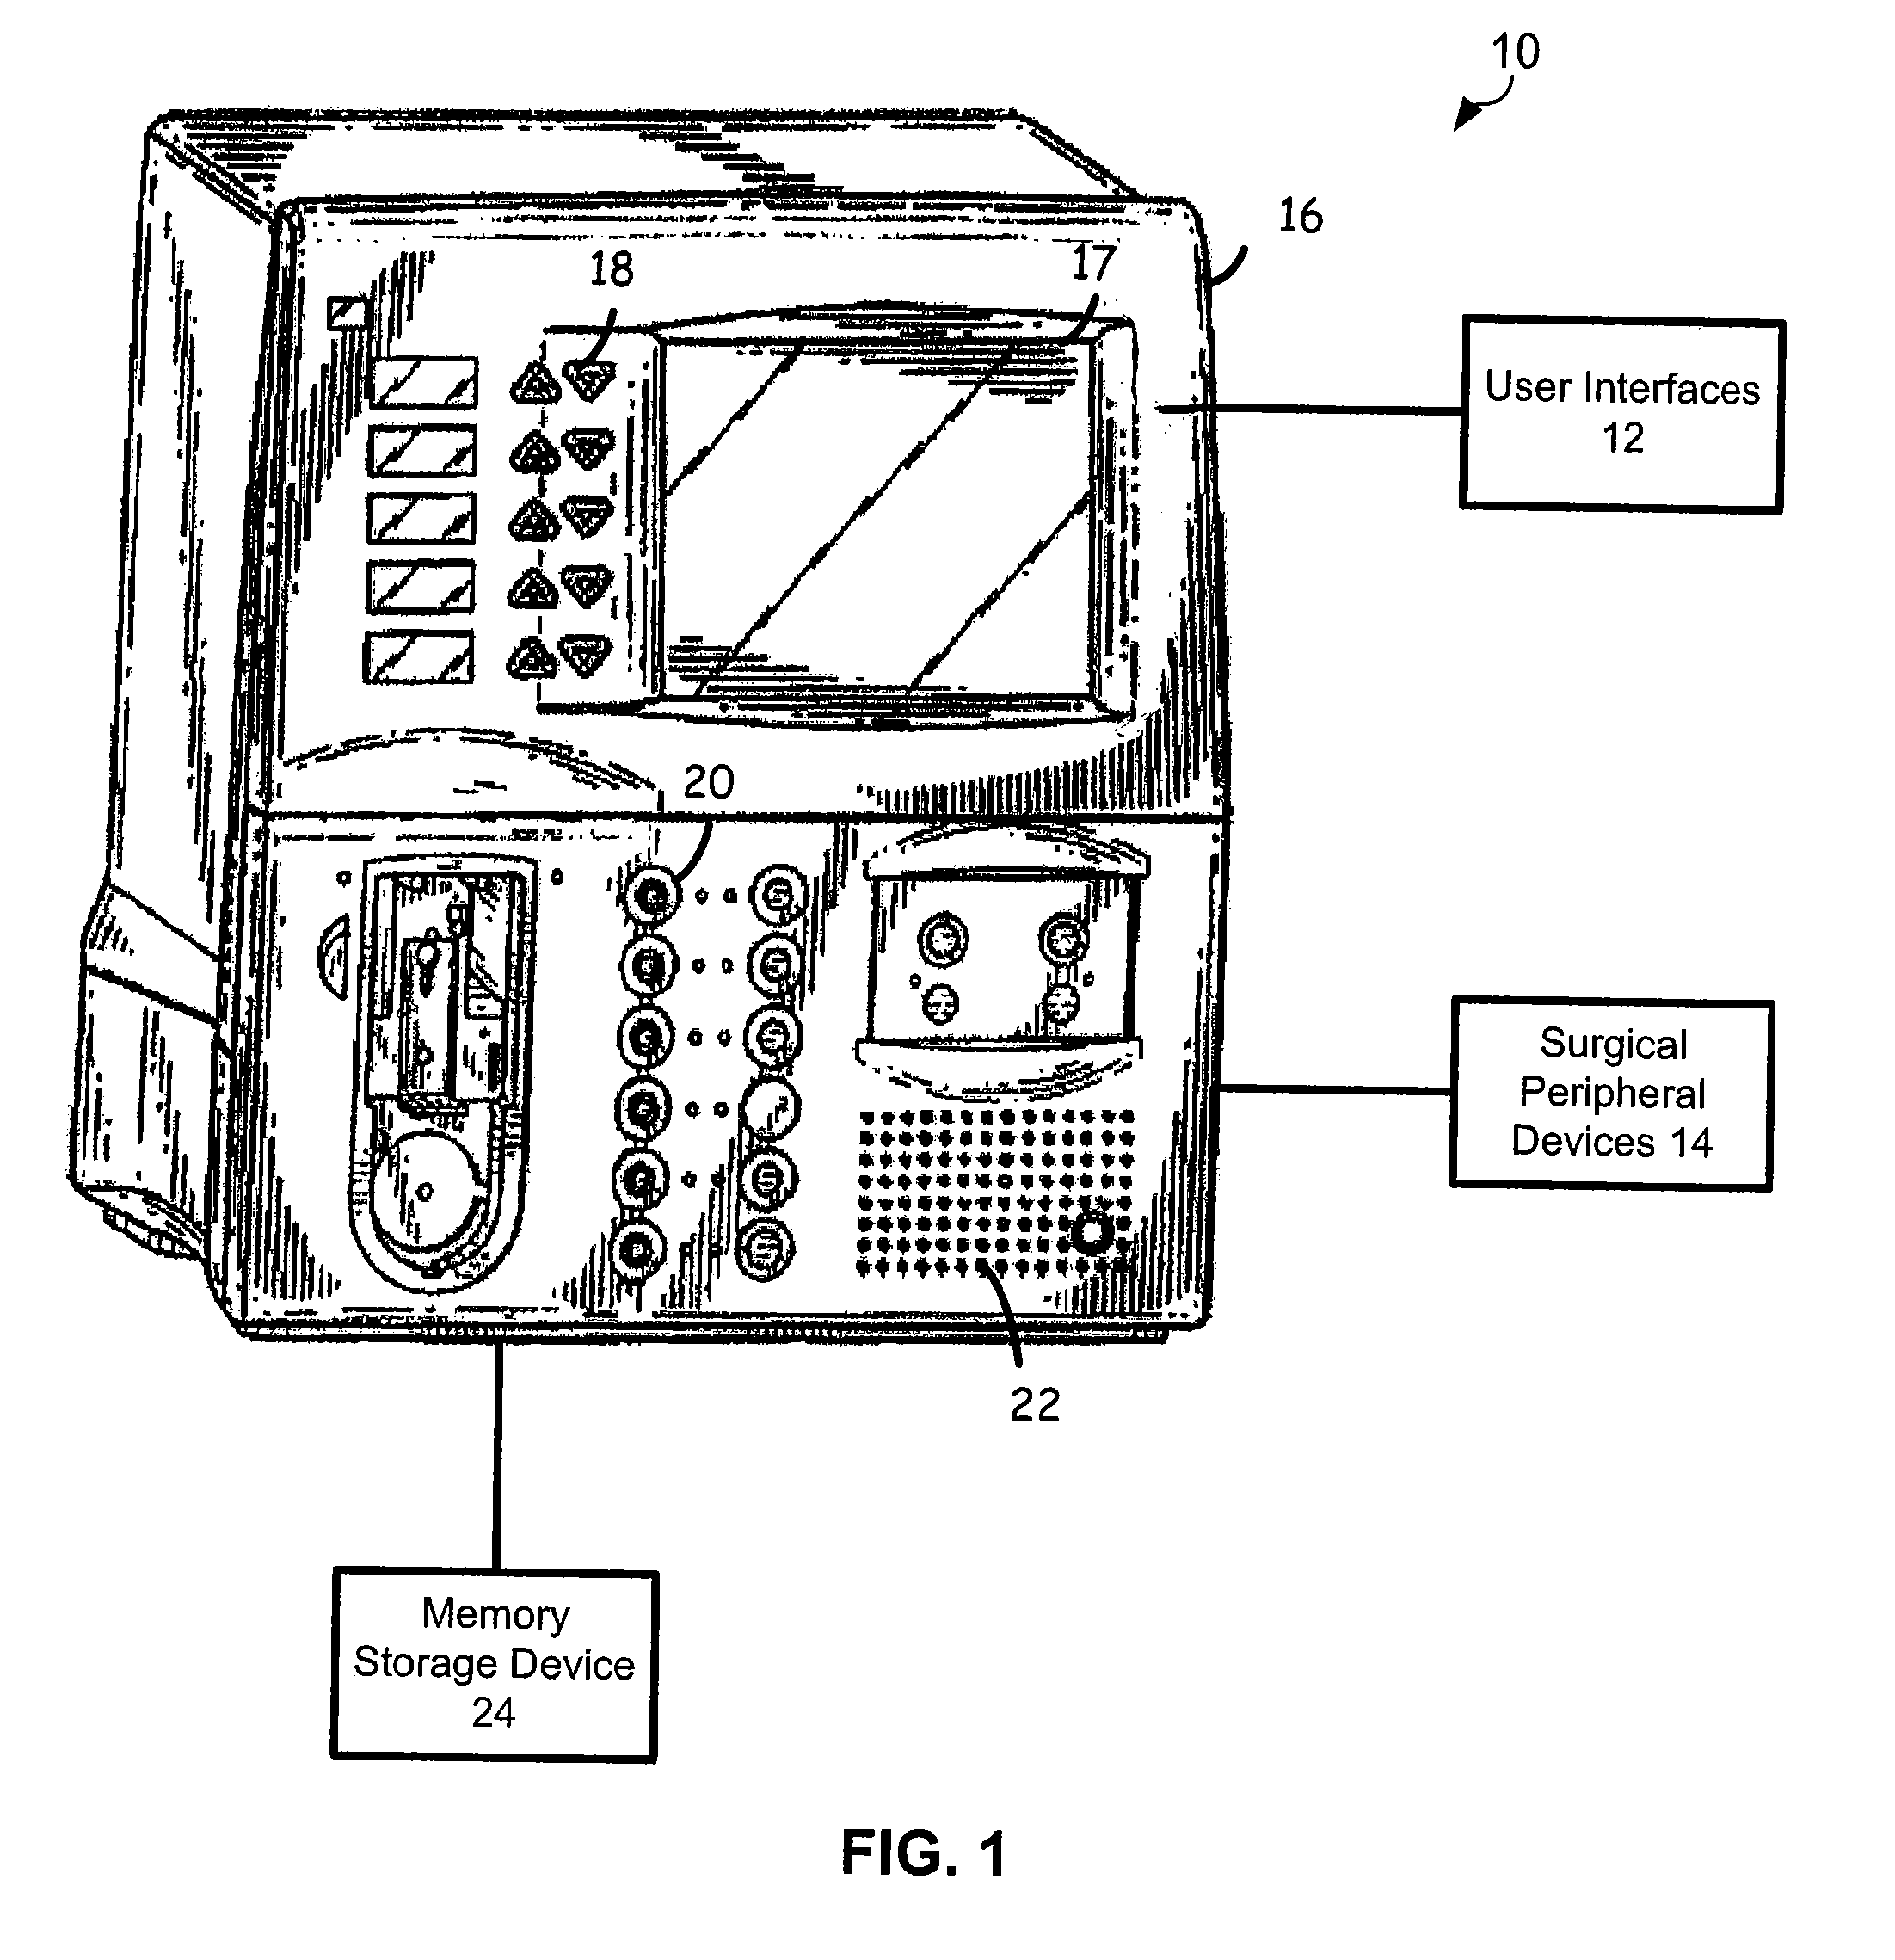 Surgical console operable to playback multimedia content